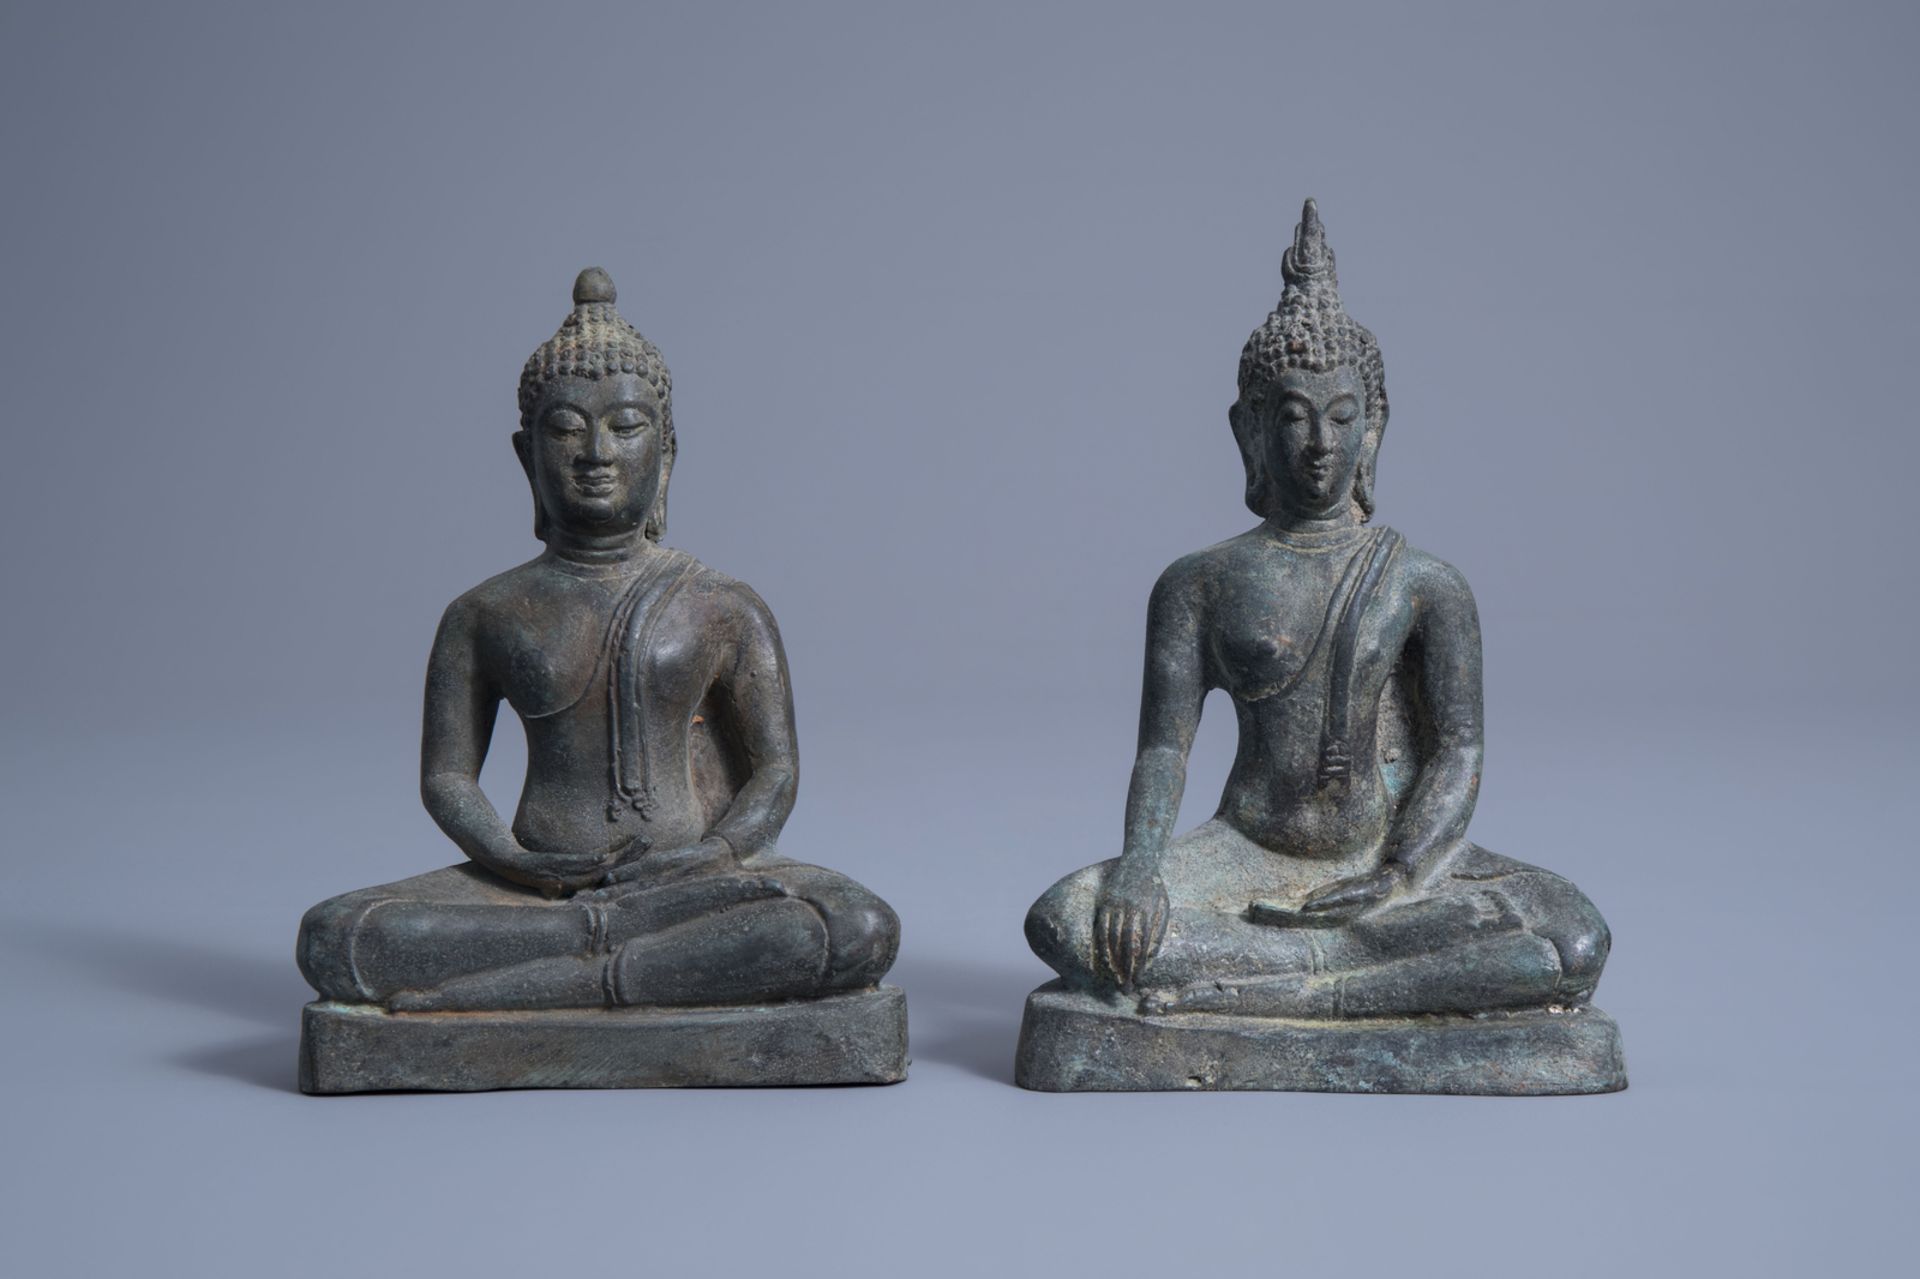 Two patinated bronze figures of Buddha, Laos or Cambodia, ca. 1900